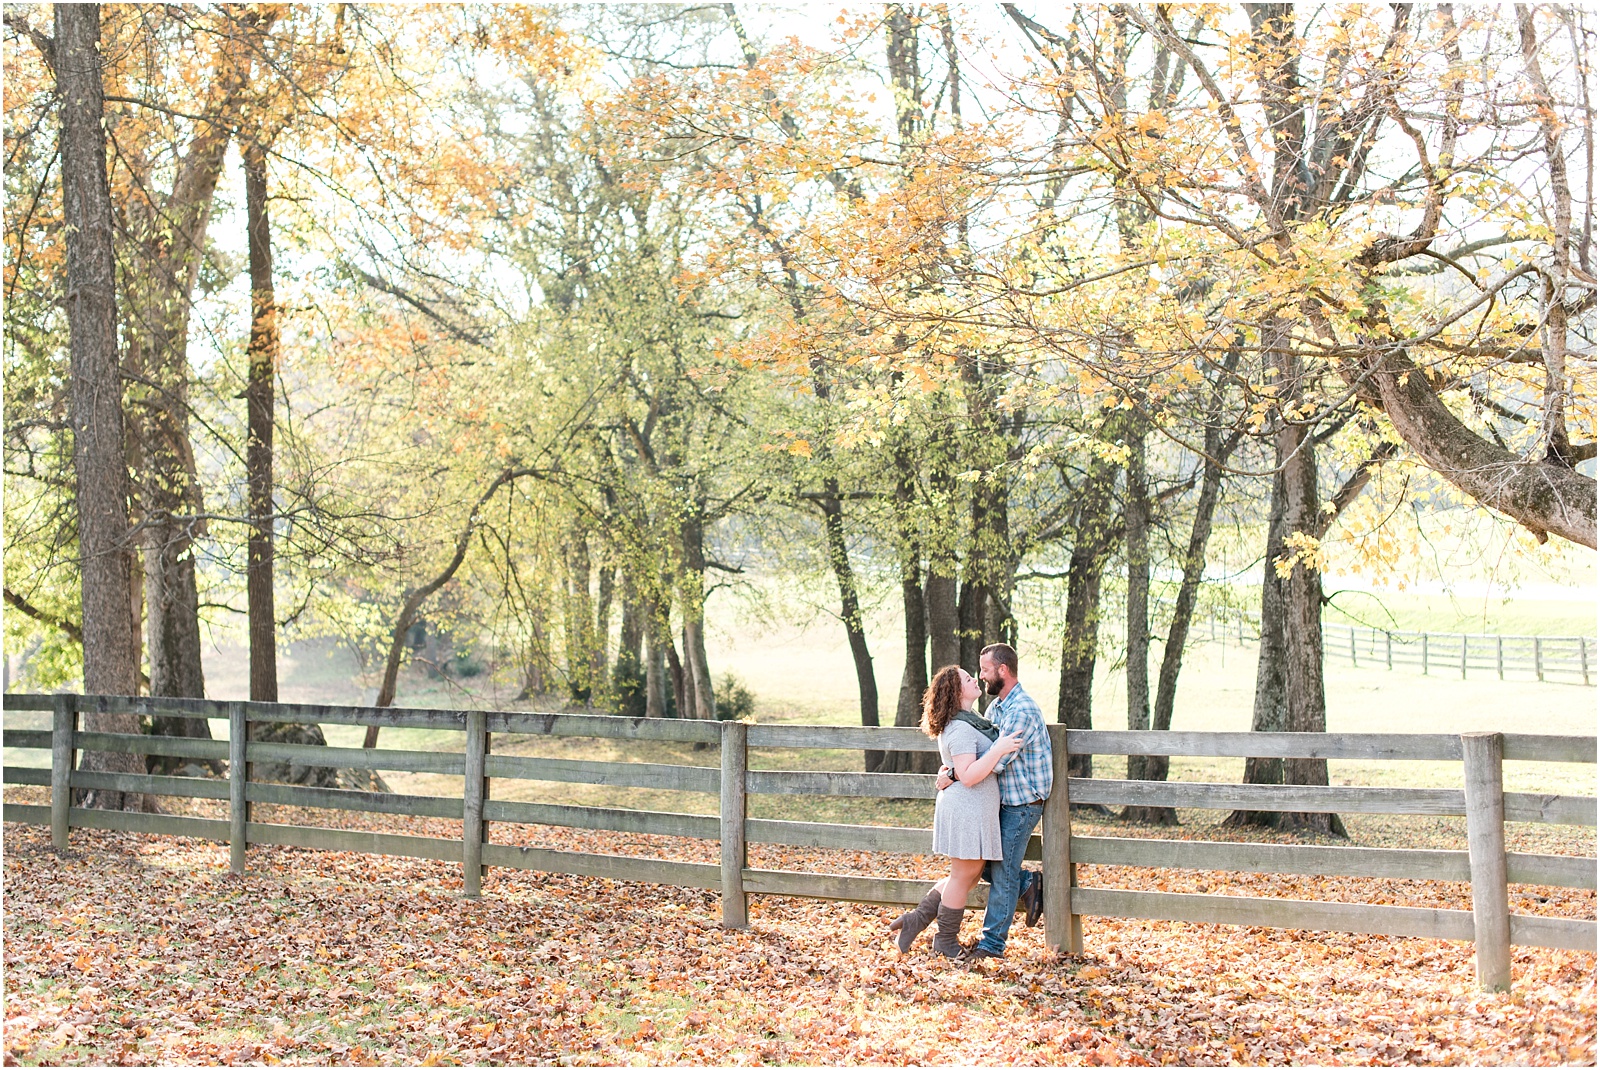 Michelle and Sara Photography, Michelle and Sara Couples, Michelle and Sara Brides, Engagement Session, Cedarock Park, Cedarock Park Engagement, Burlington NC, Burlington Engagement Session, Romantic Engagement Session, Fall Engagement Session 